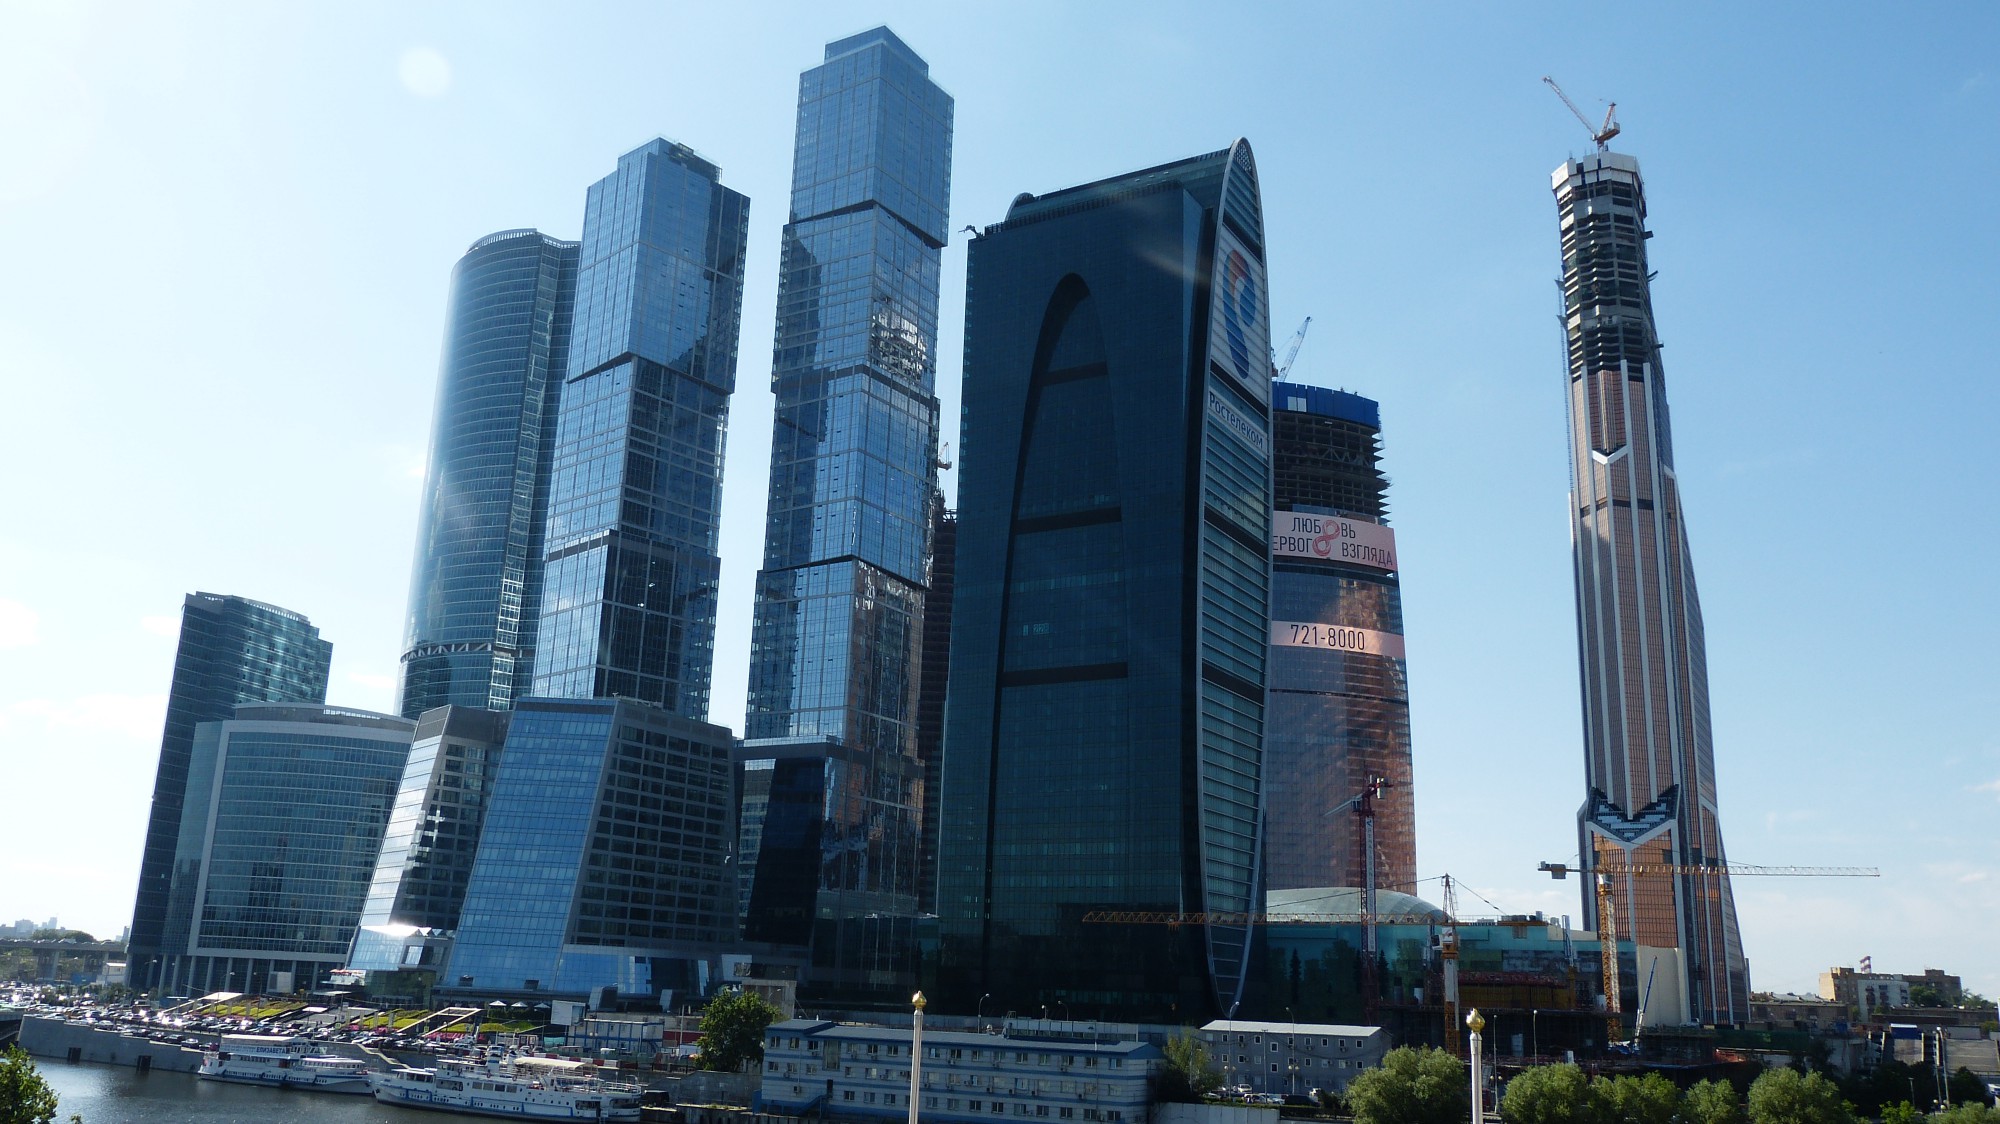 Moscow City. Photograph: Mariano Montel under a CC licence